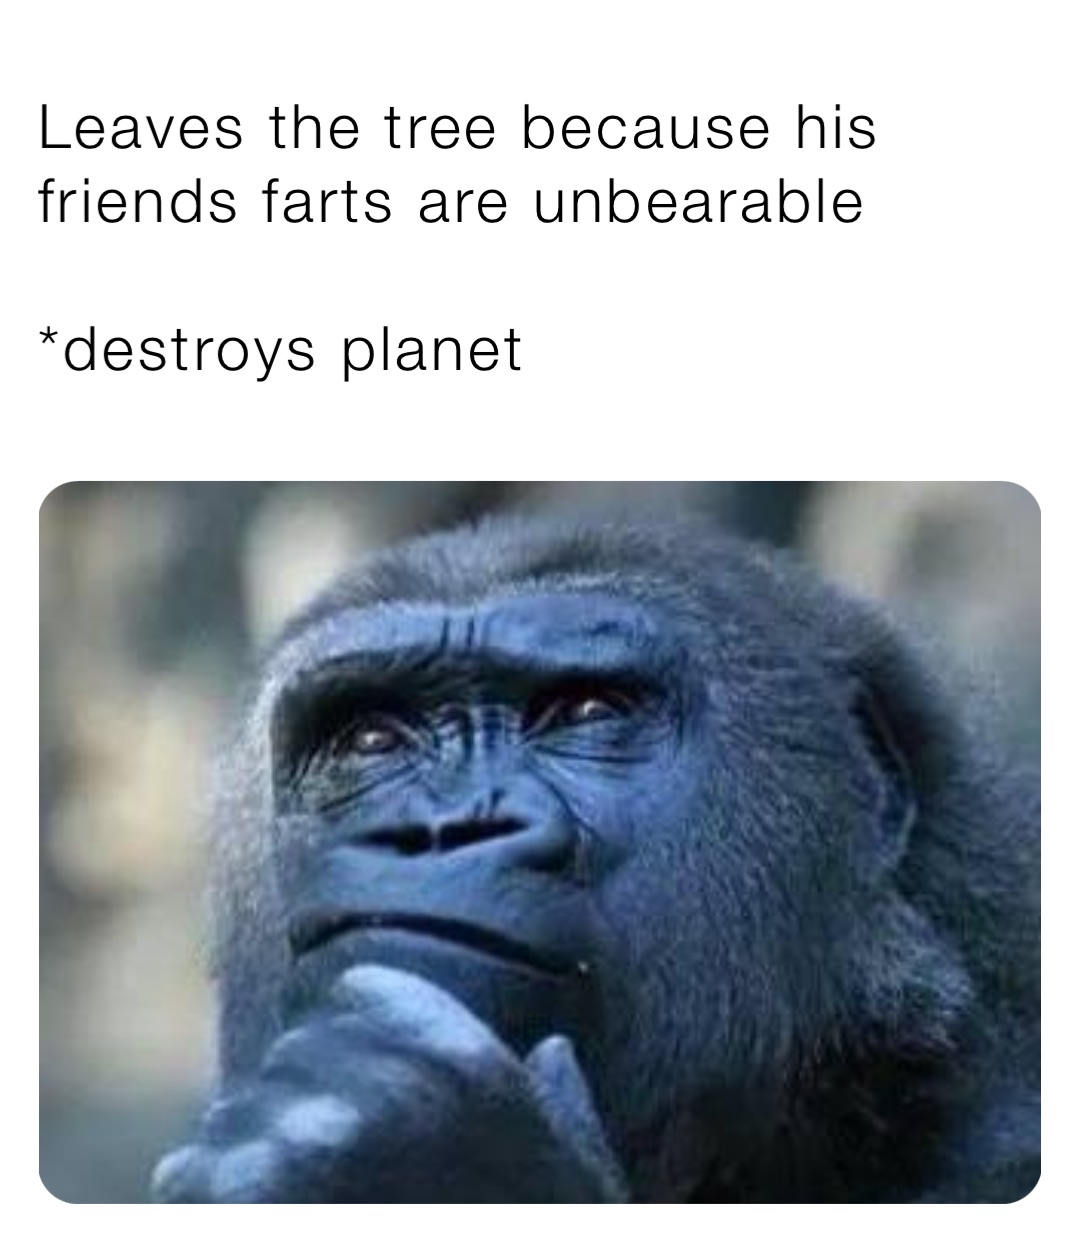 Leaves the tree because his friends farts are unbearable

*destroys planet